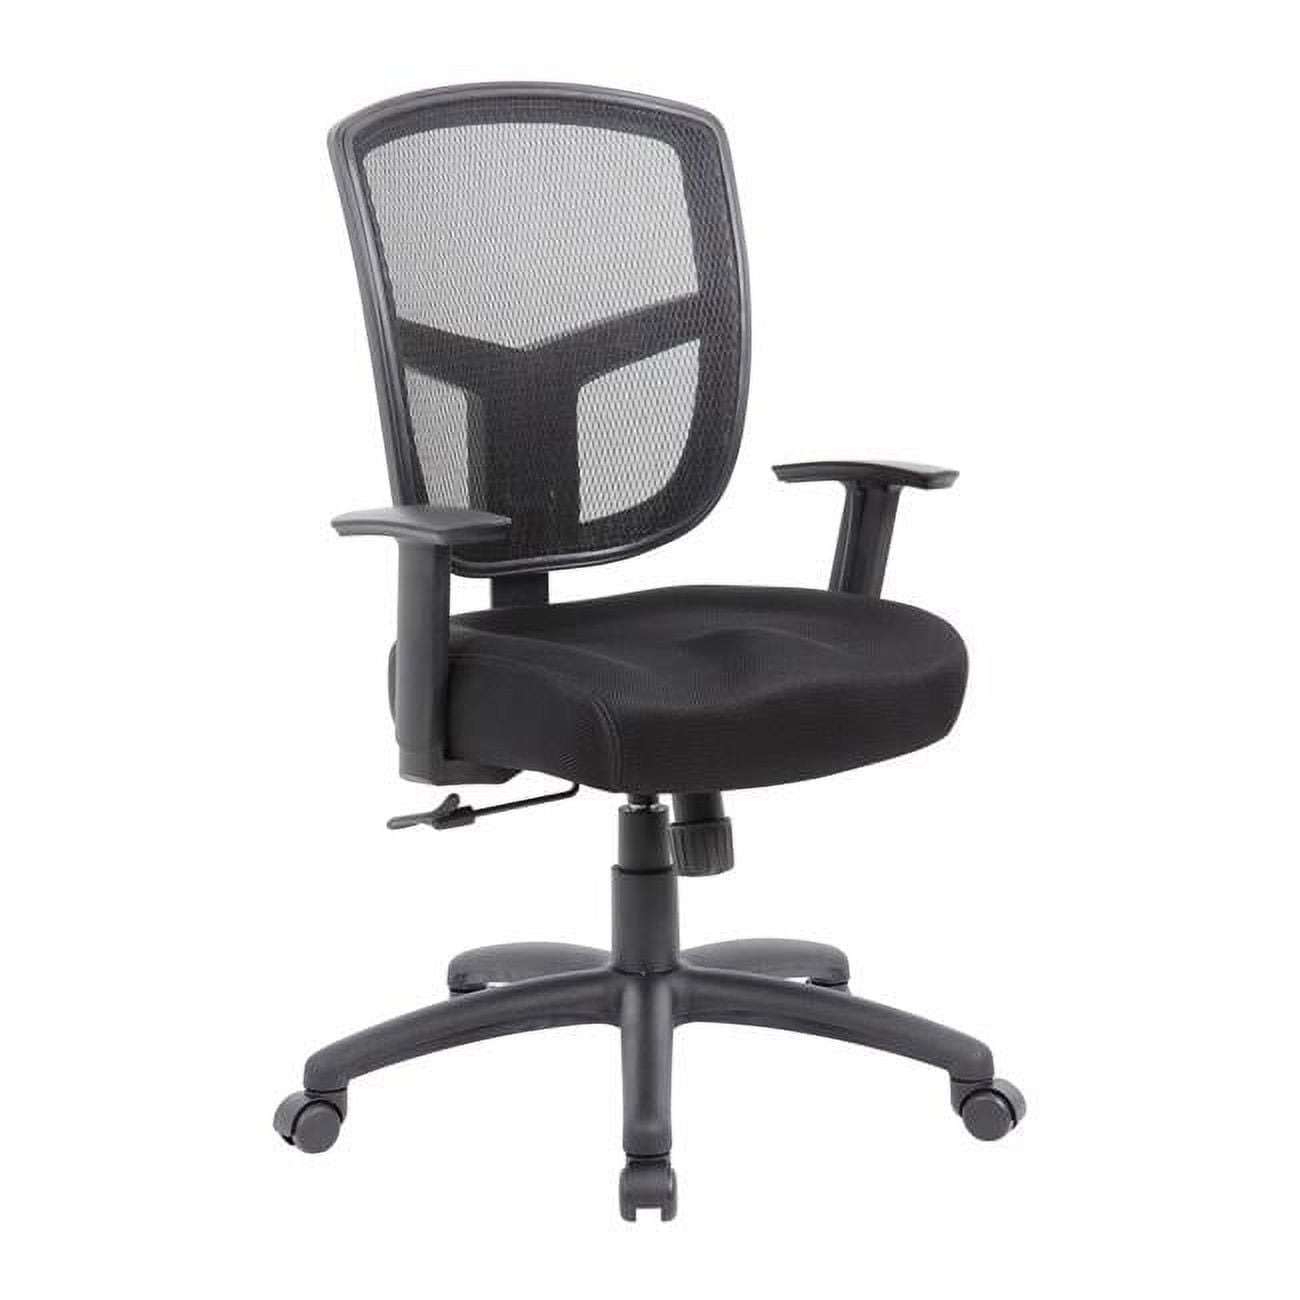 B669bk-sg Boss Office Products, Taylor Chair